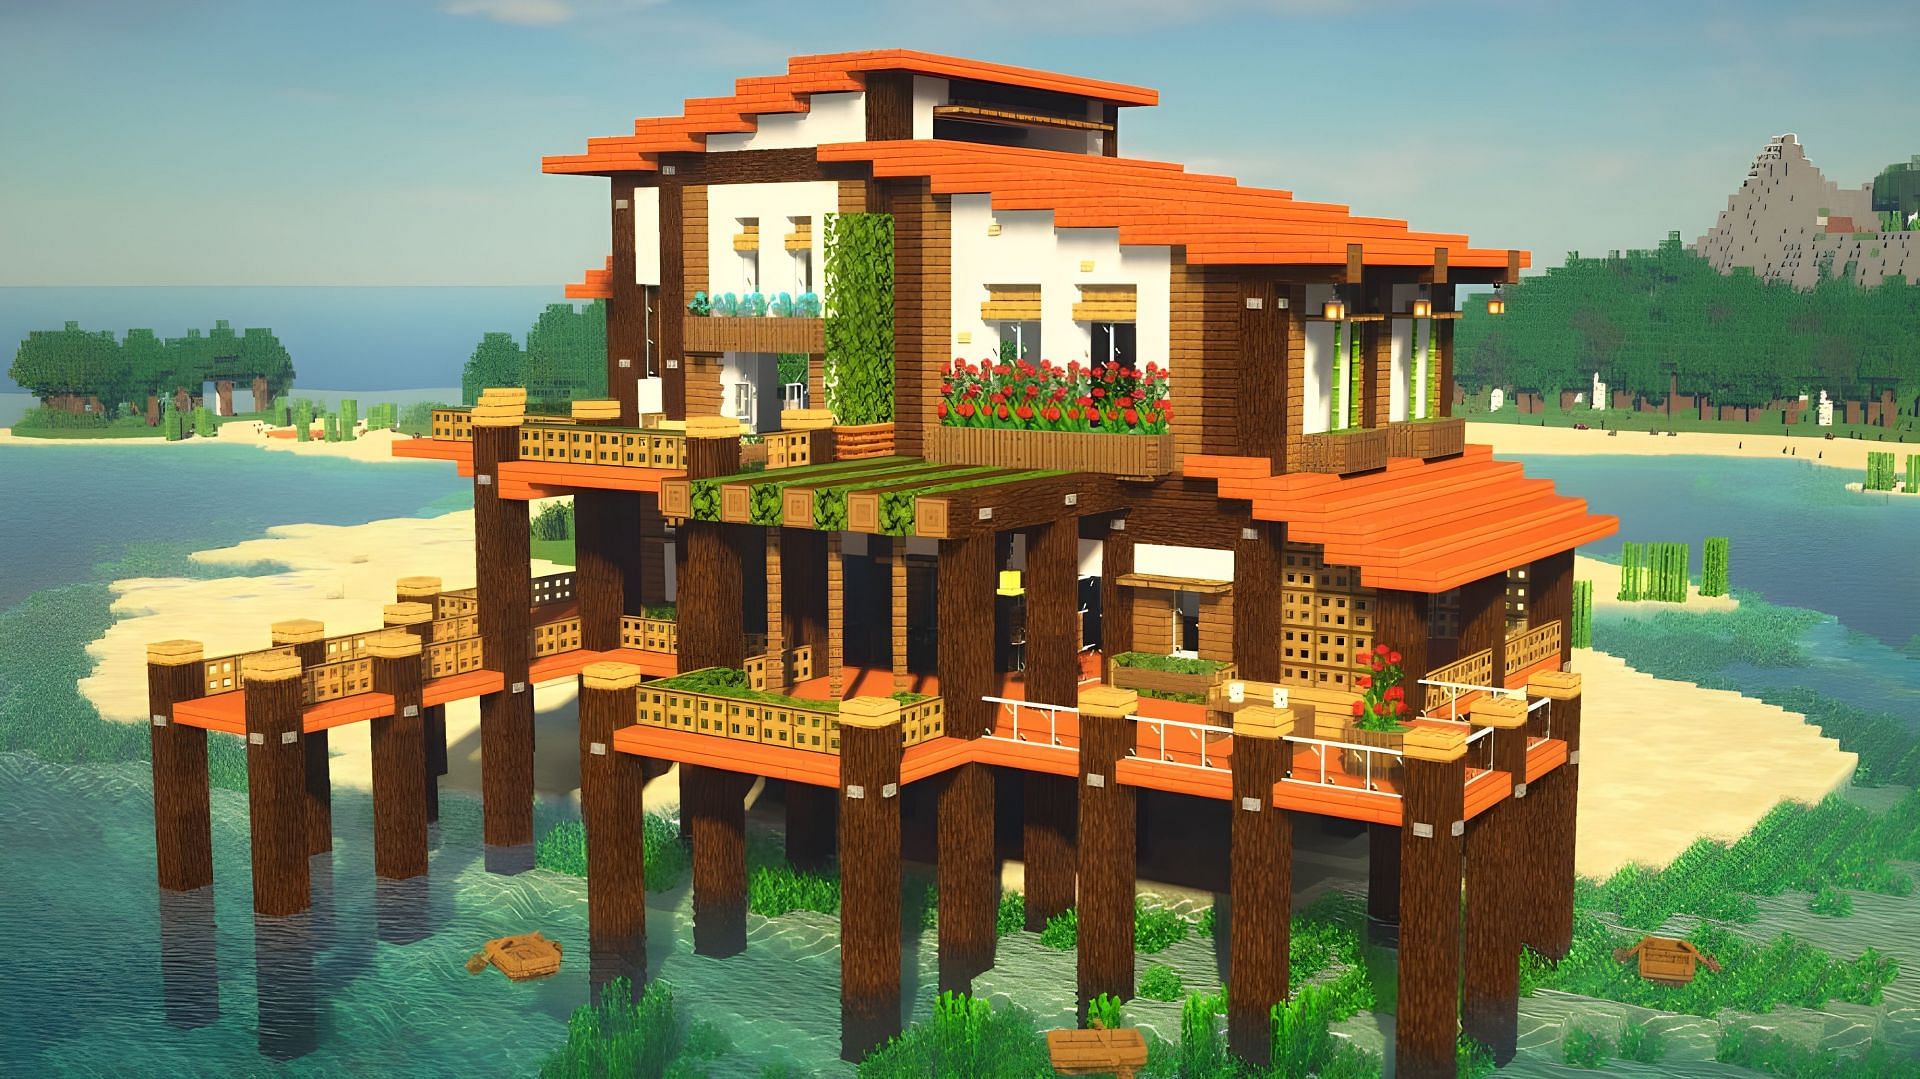 Minecraft beach house builds are beautiful (Image via Youtube/A1MOSTADDICTED MINECRAFT)